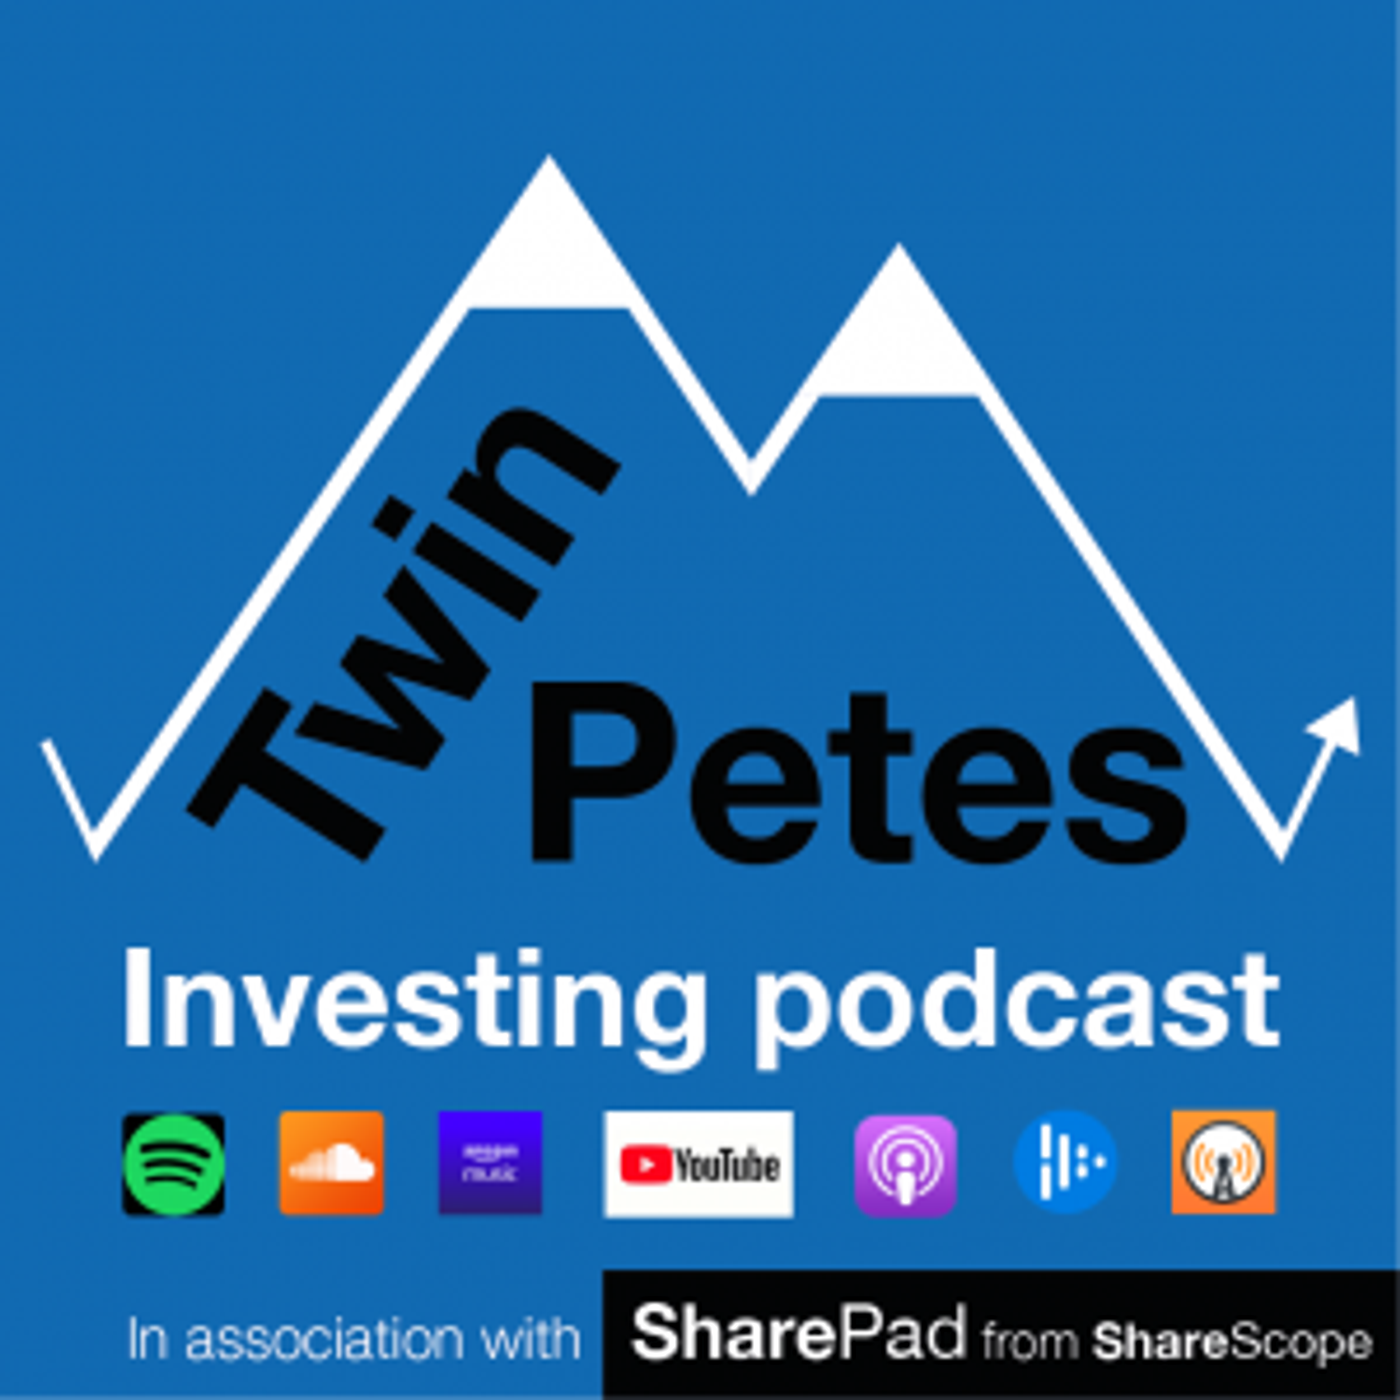 172: TWIN PETES INVESTING Podcast no.119: Could Private Equity dry powder drive further takeovers? Computacenter Bridgepoint, Agco Corp, Watches of Switzerland, Rolex watches, Systems1 Group, H&T Grou